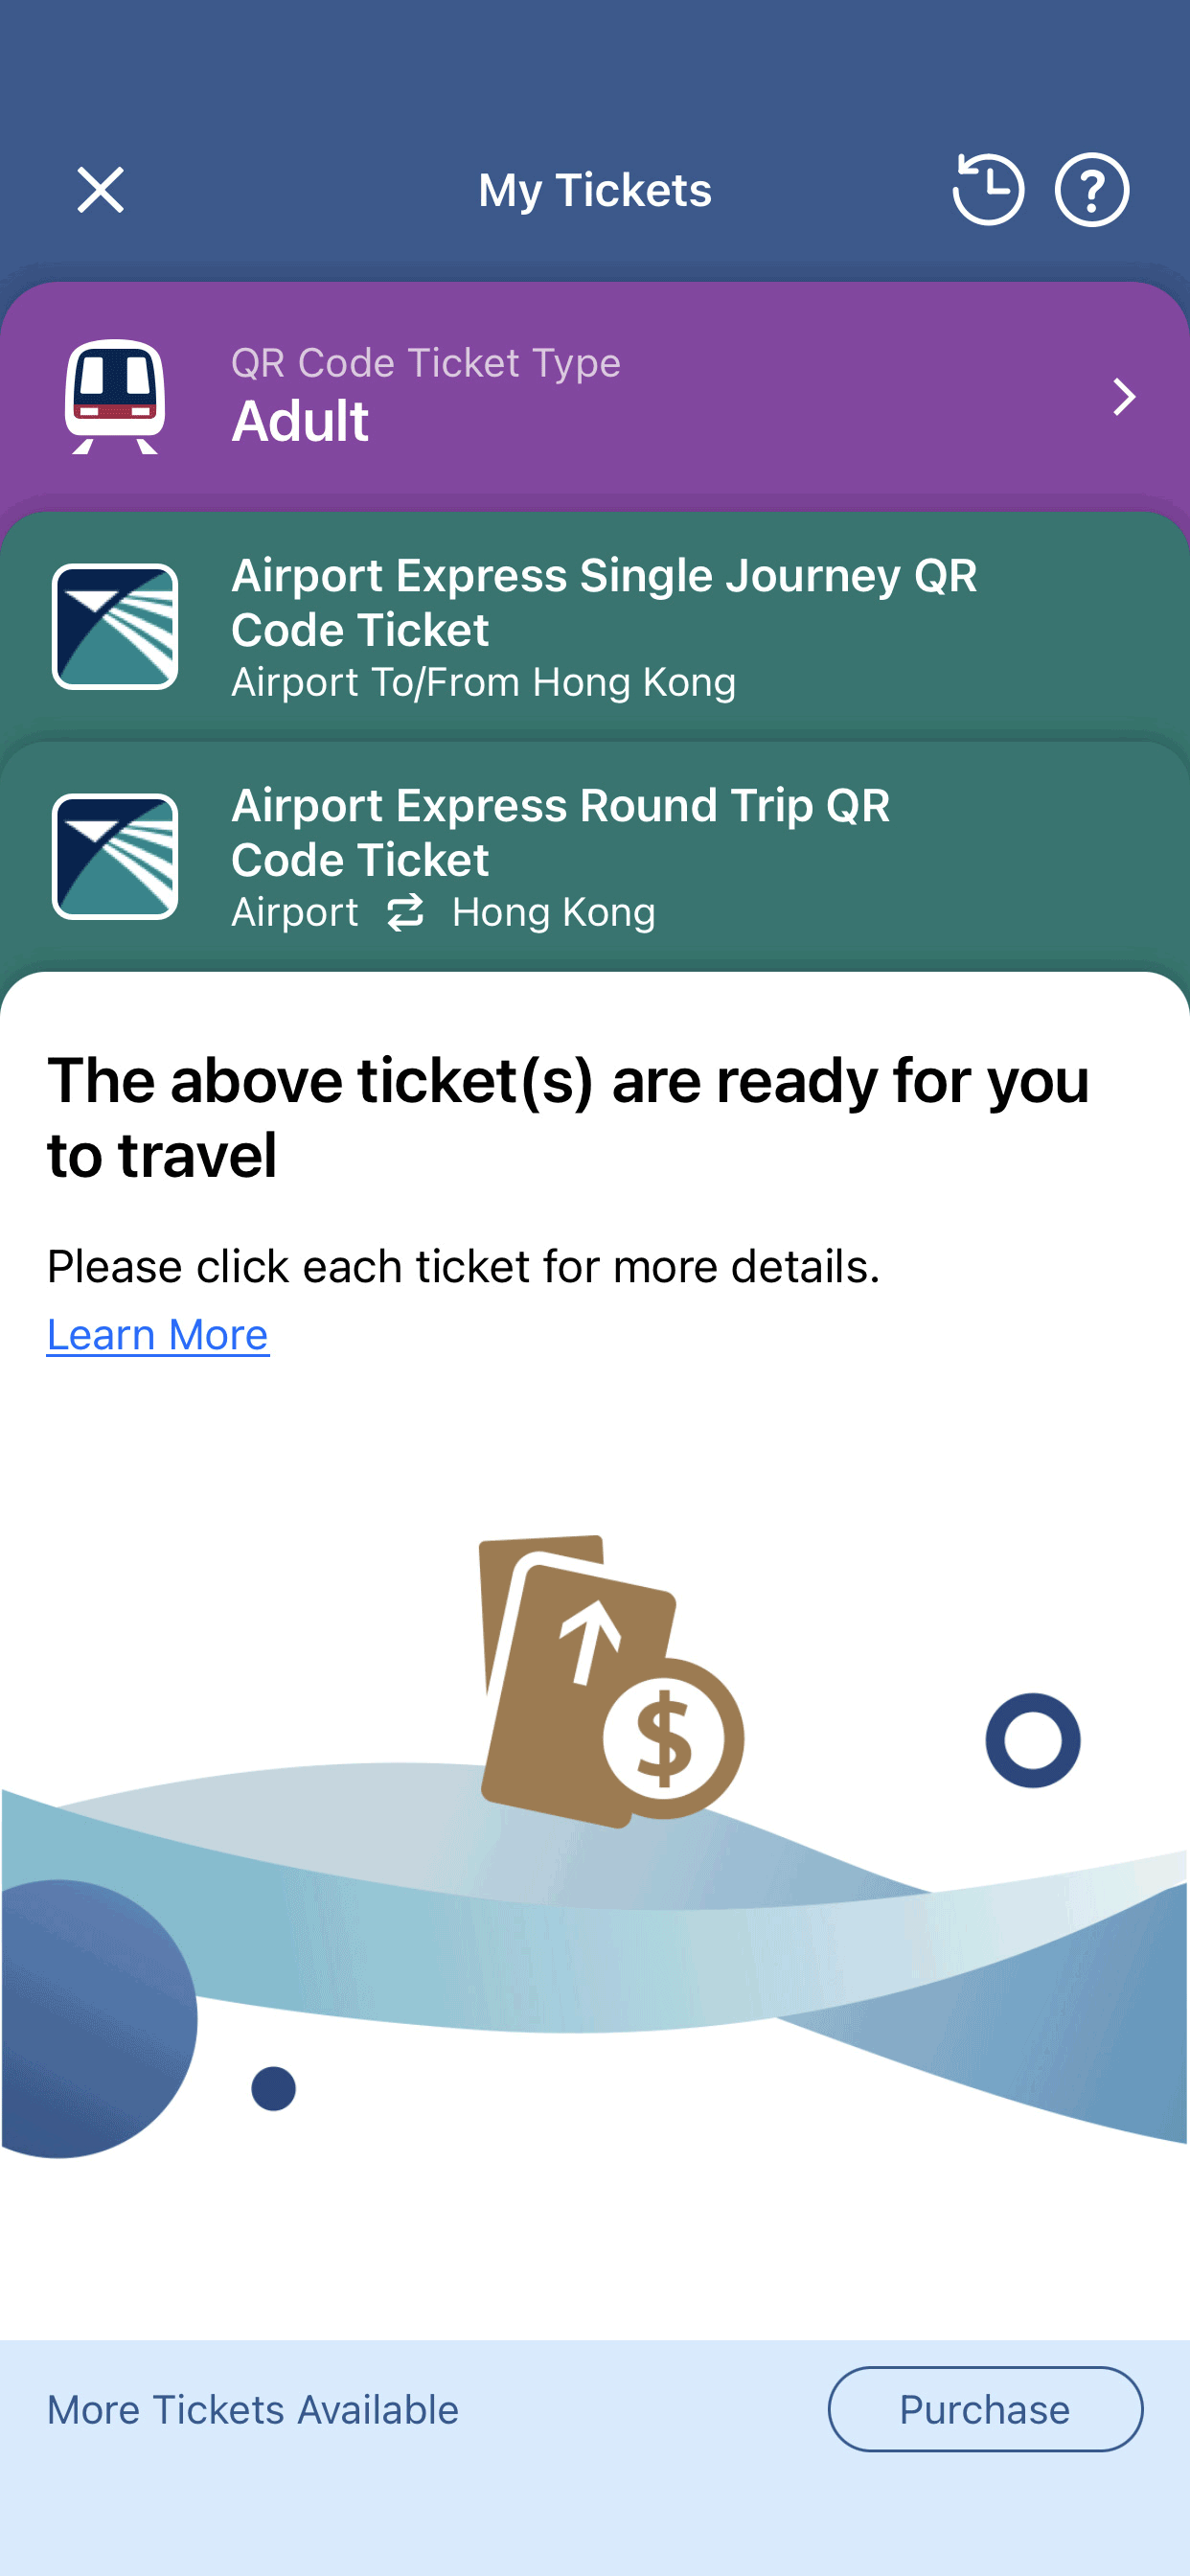 Display all QR Code Tickets, Airport Express Single Journey / Round Trip QR Code Tickets in advance. Select the applicable QR Code Ticket from the list view